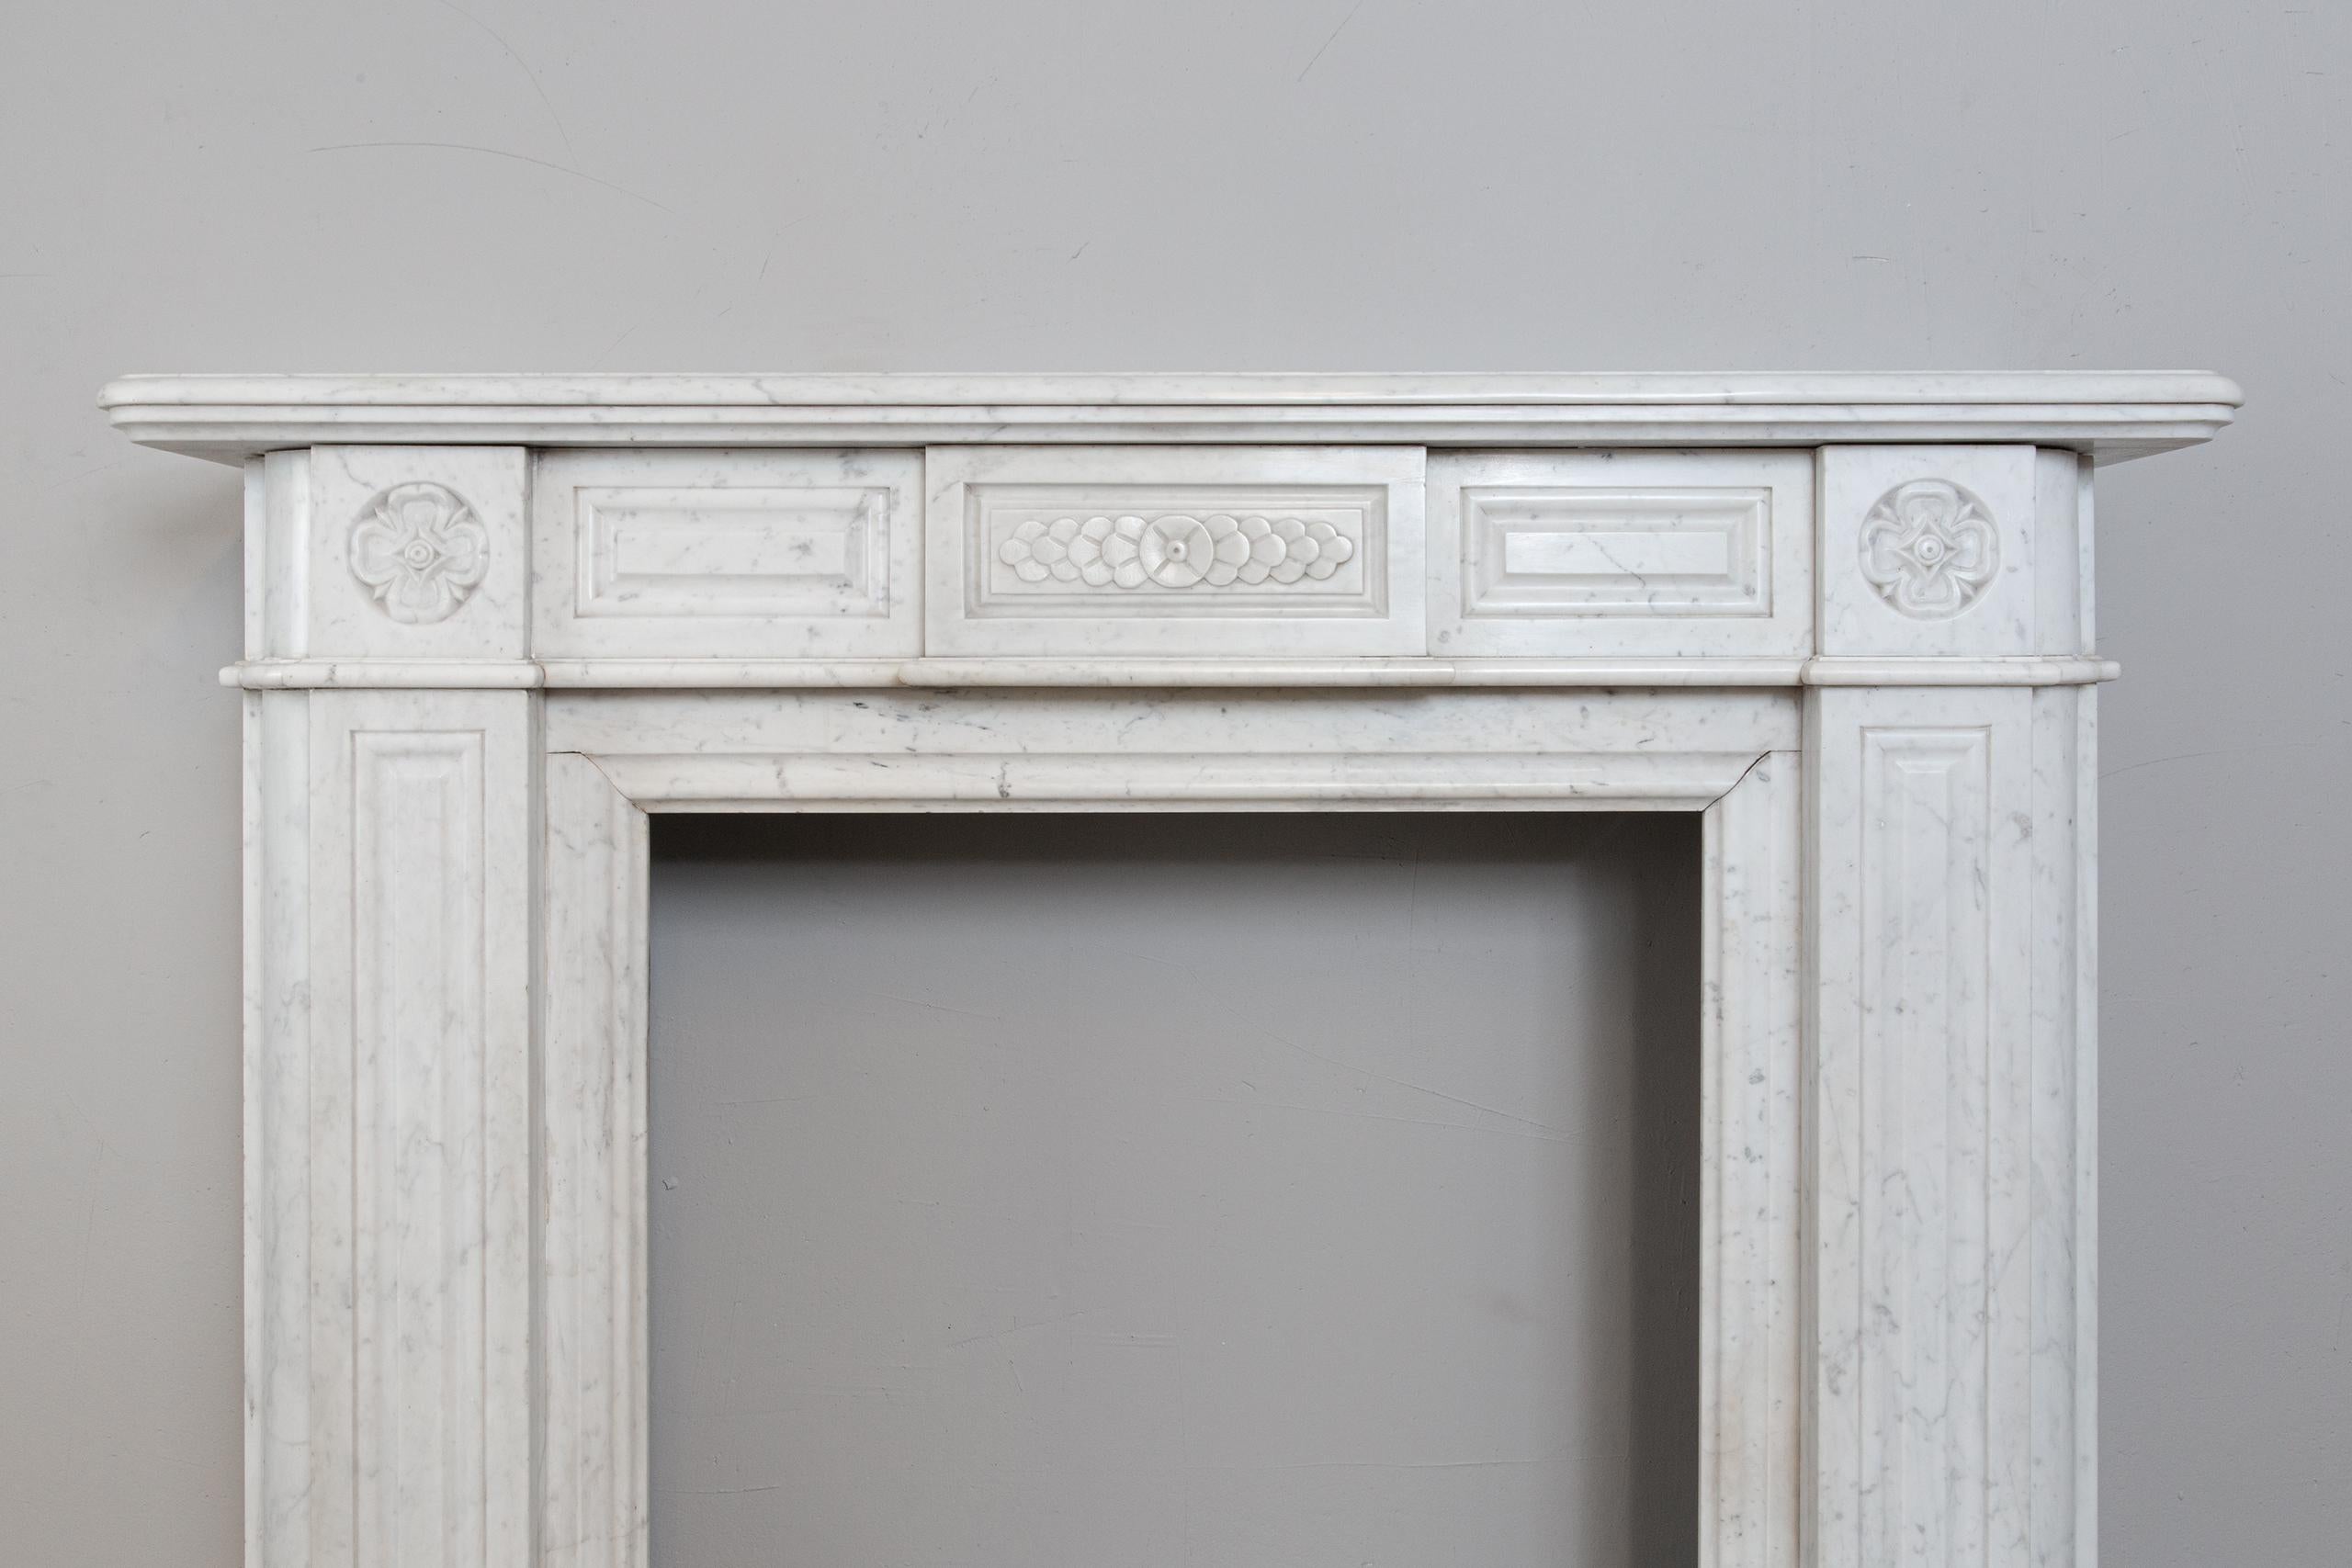 This fireplace, executed in the beautiful clear white Carrara marble, exudes luxury. The round corners that continue from the plinth to the top give this fireplace its elegant appearance. The subtly elaborated legs with flowers on the top. The